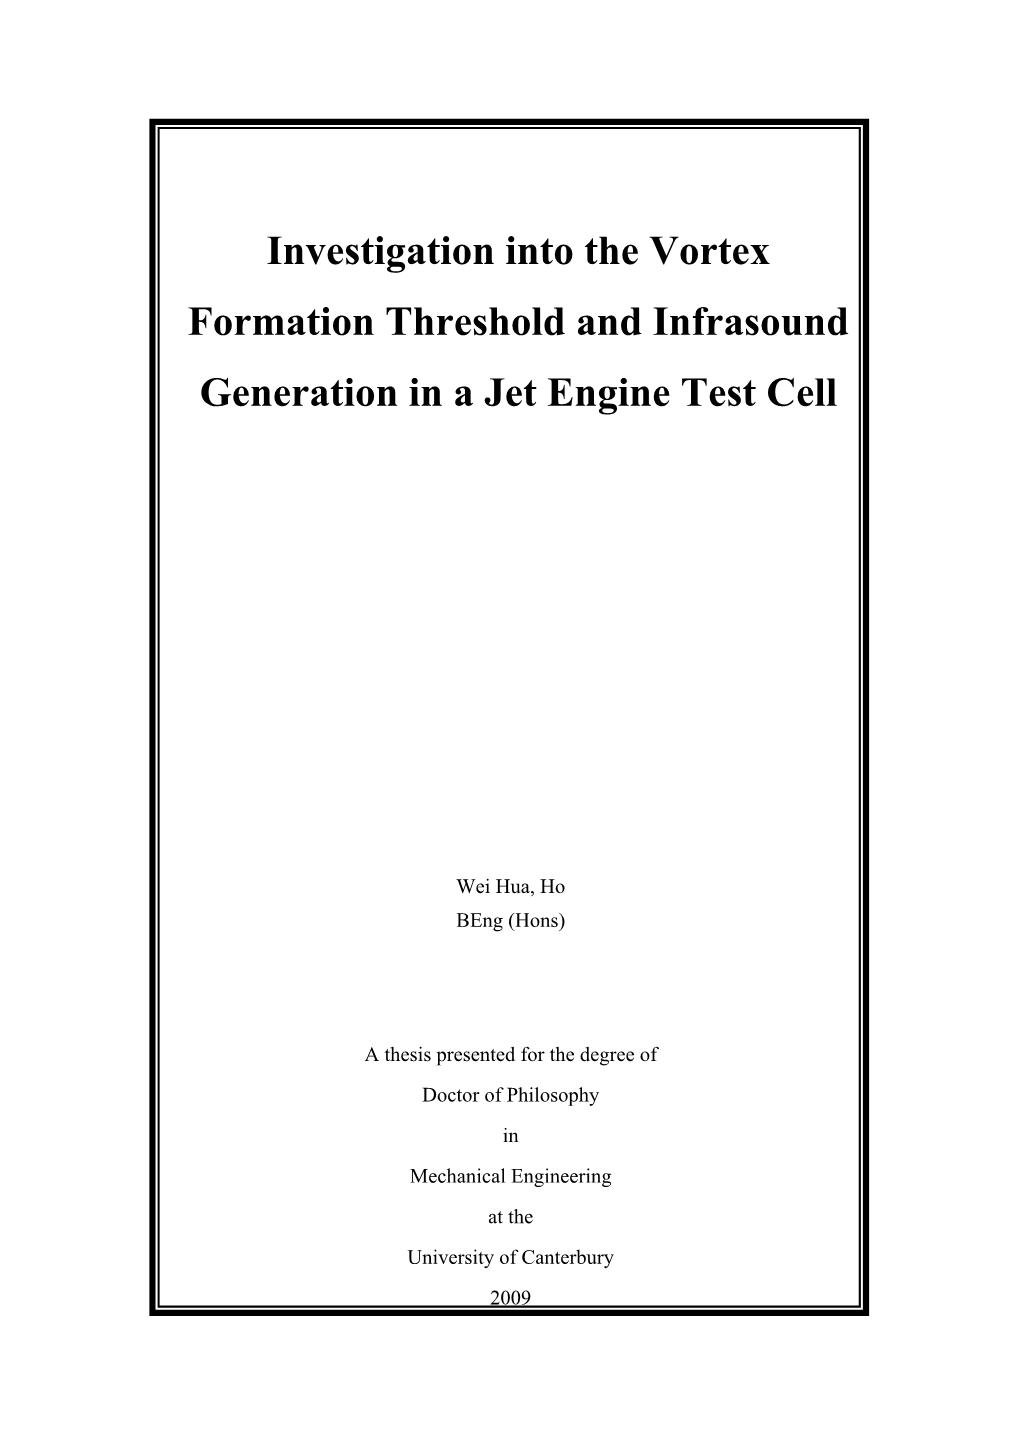 Investigation Into the Vortex Formation and Infrasound Generation in a Jet